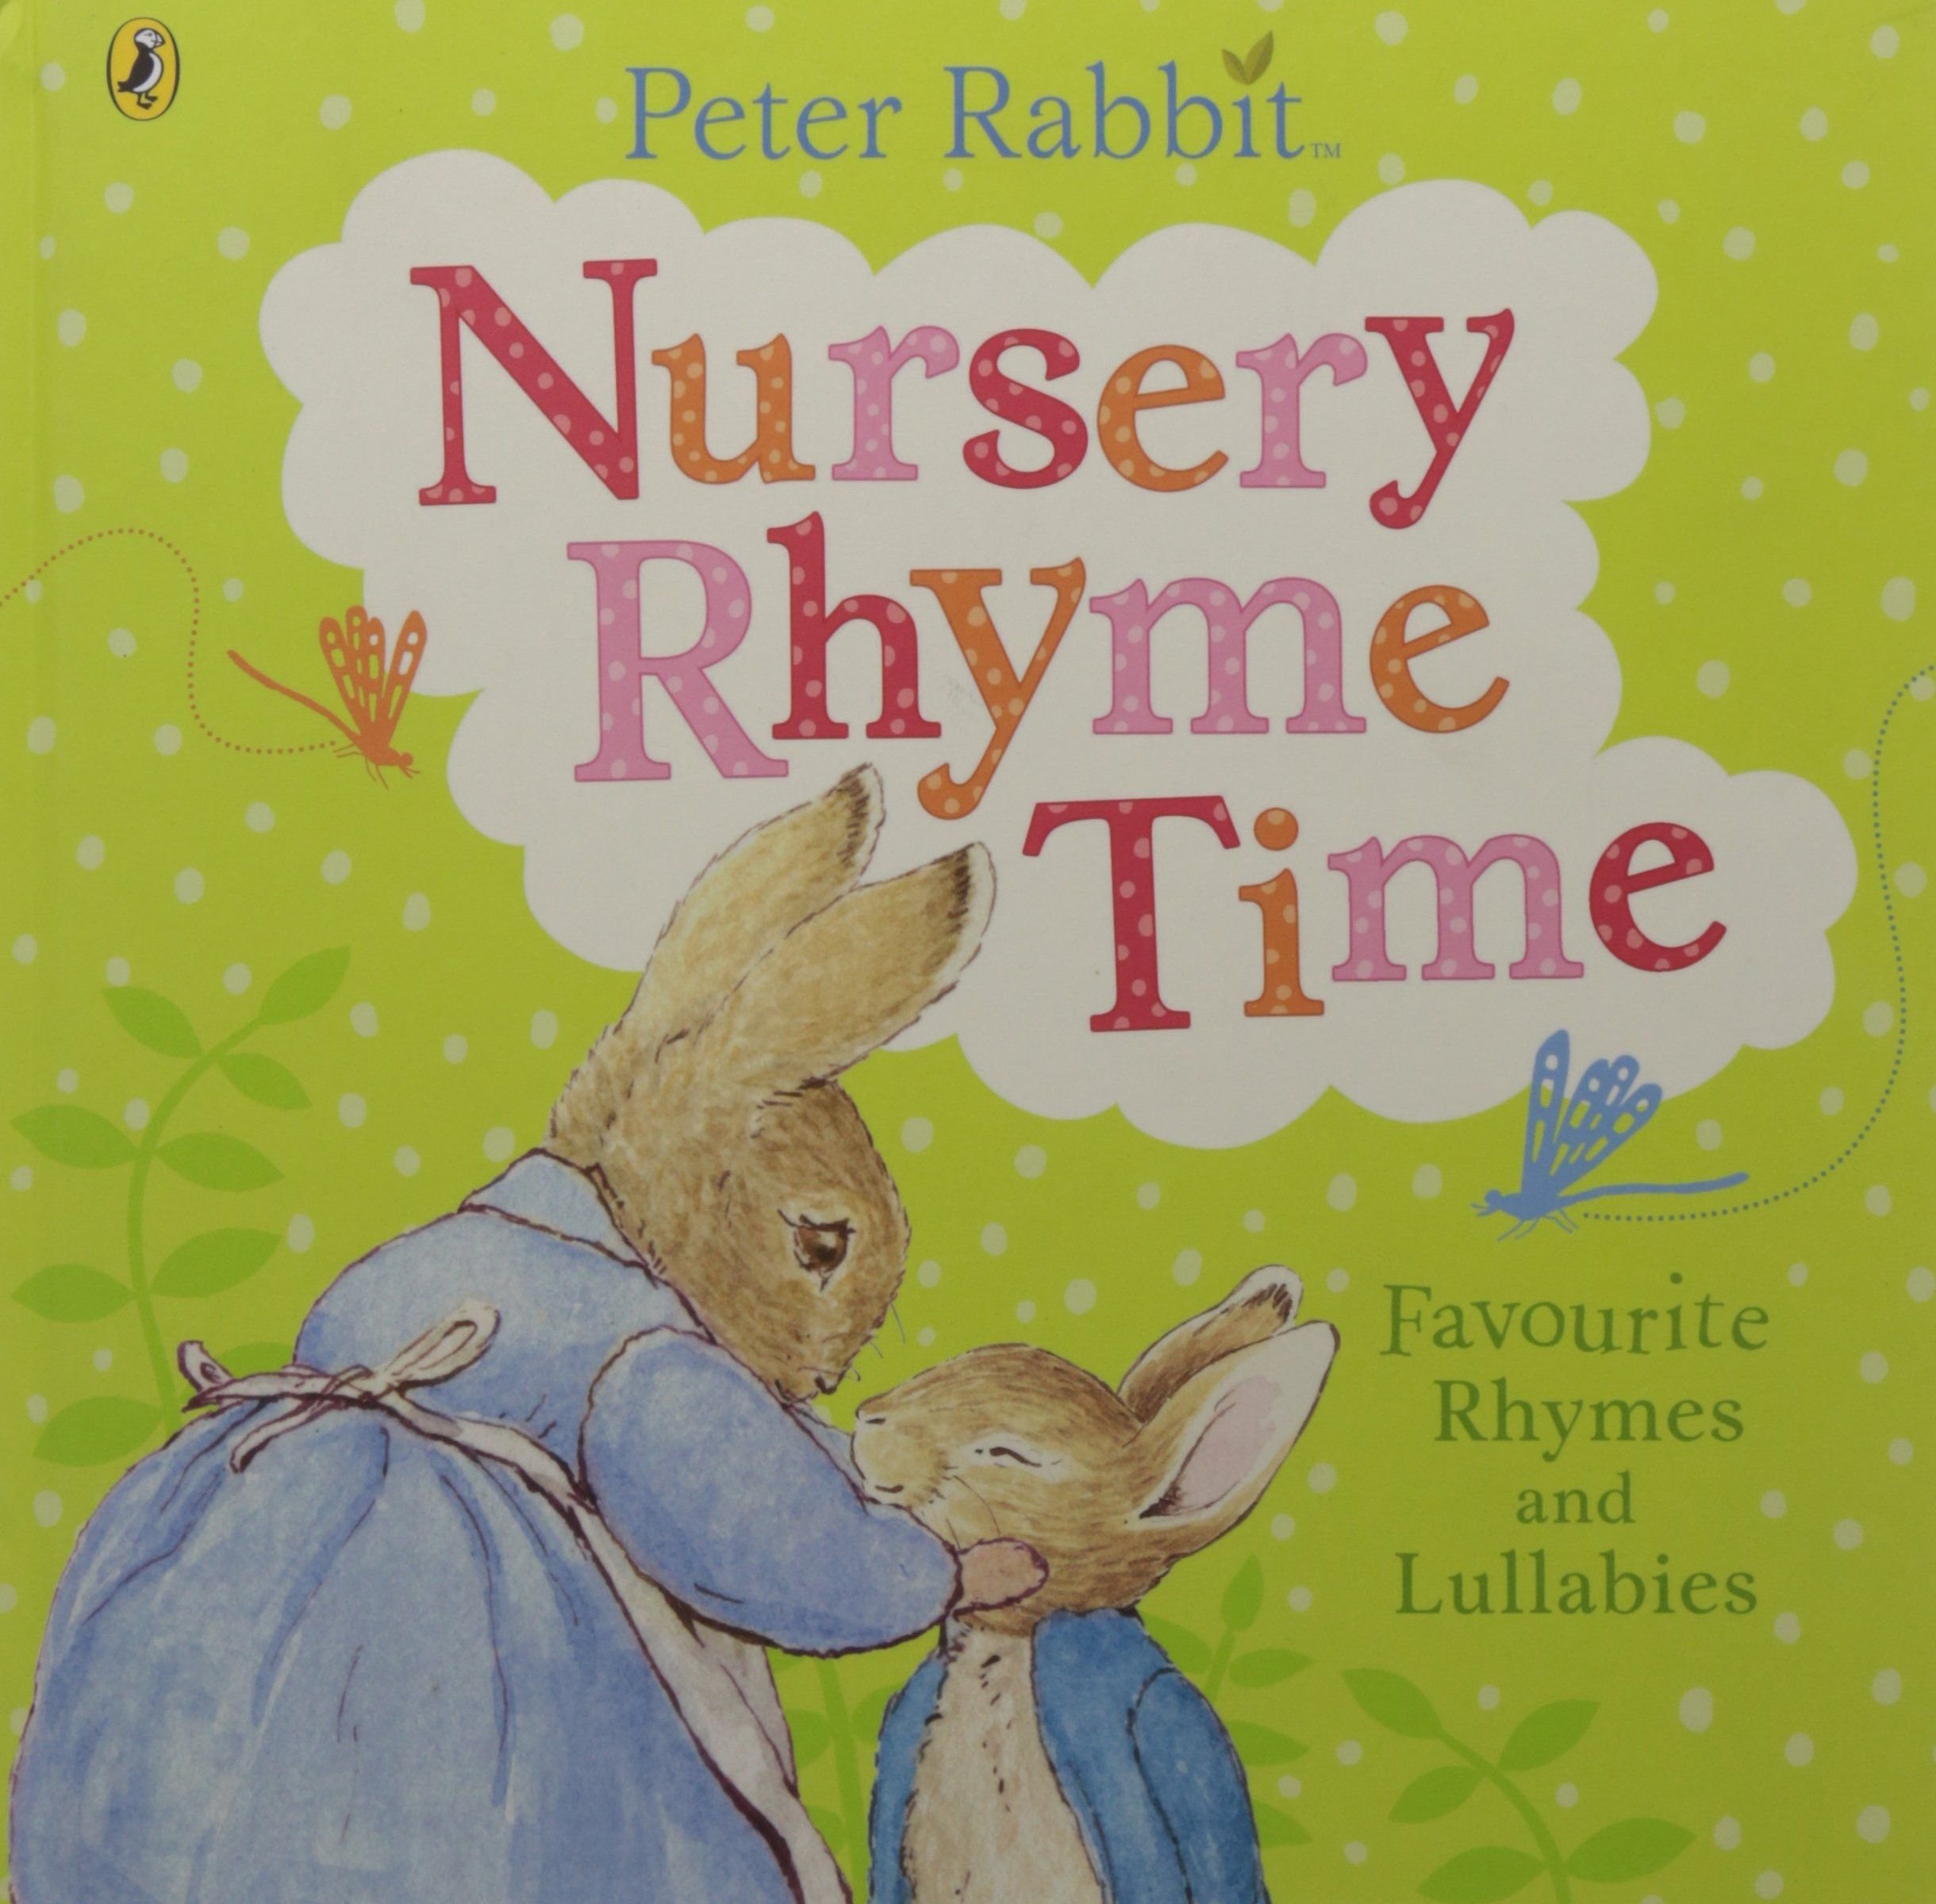 Buy　Free　Rhyme　Peter　With　Time　Rabbit:　Nursery　Delivery